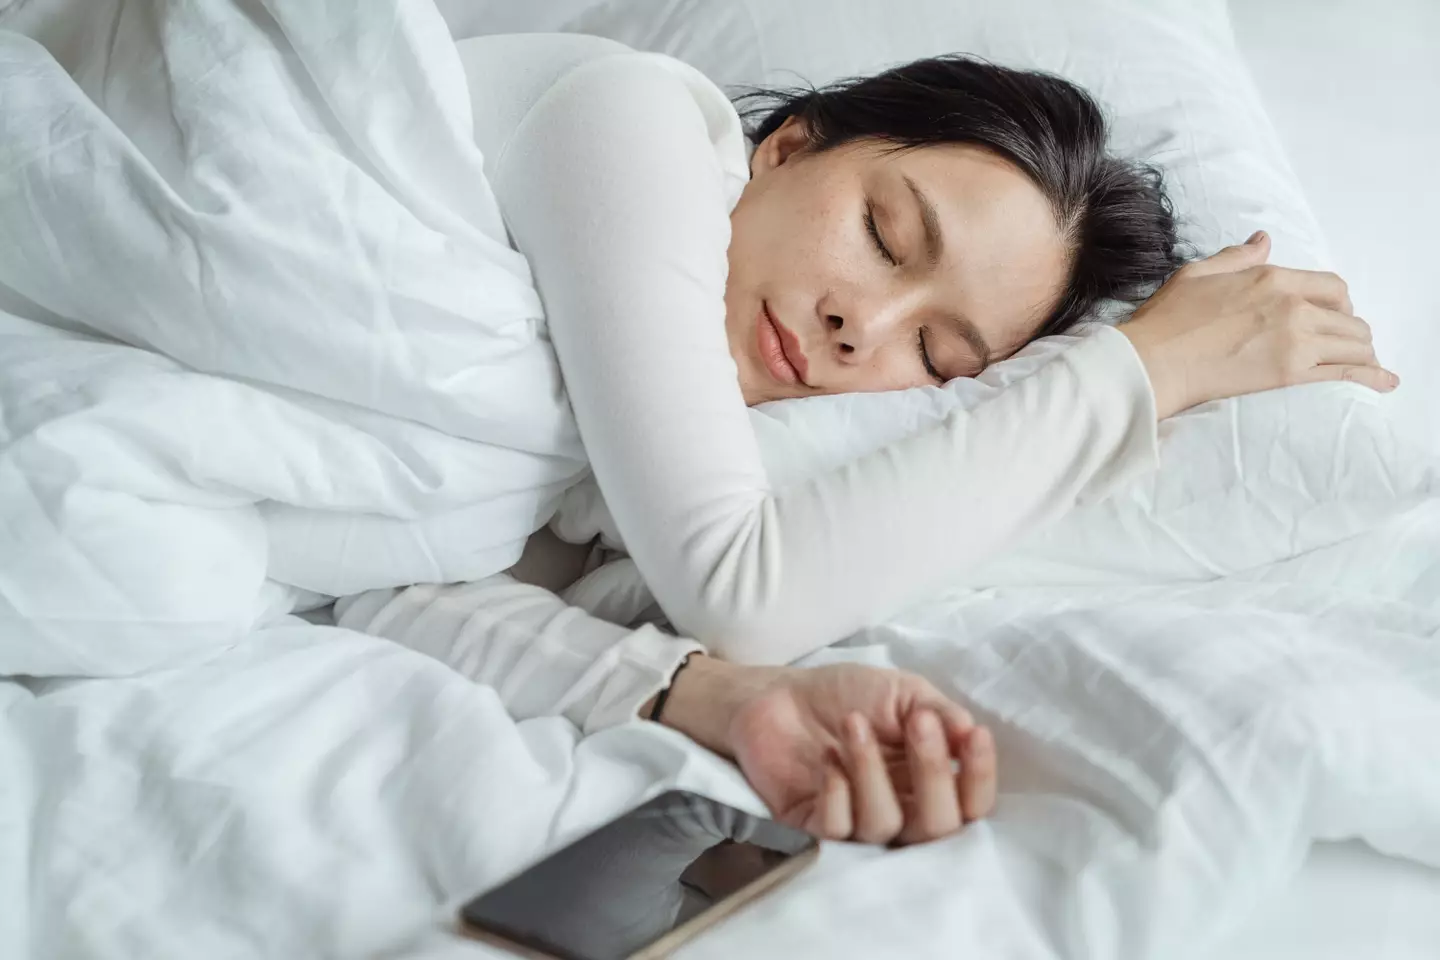 There are benefits to creating fake scenarios before sleeping according to a sleep expert. (